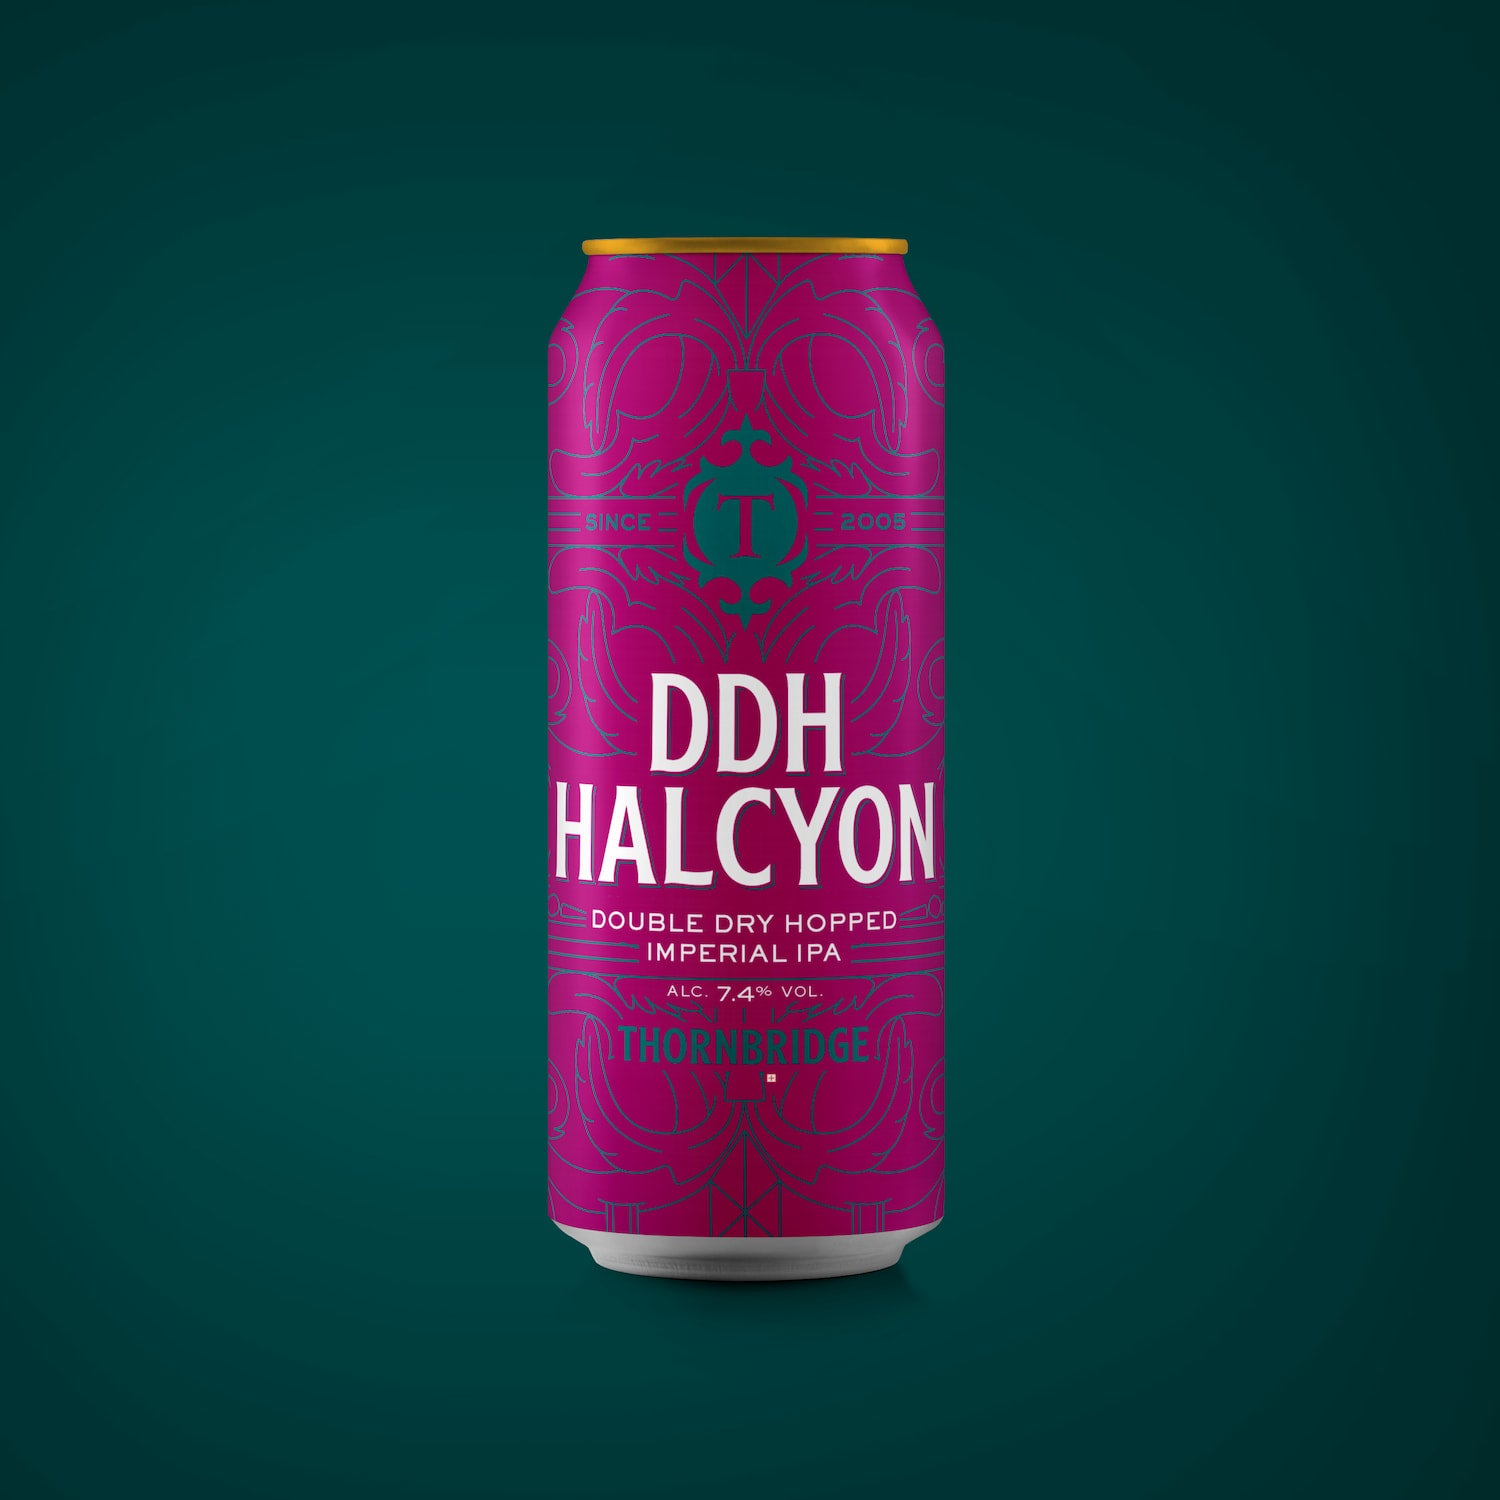 DDH Halcyon, 7.4% DDH Imperial IPA Beer - Single Can Thornbridge